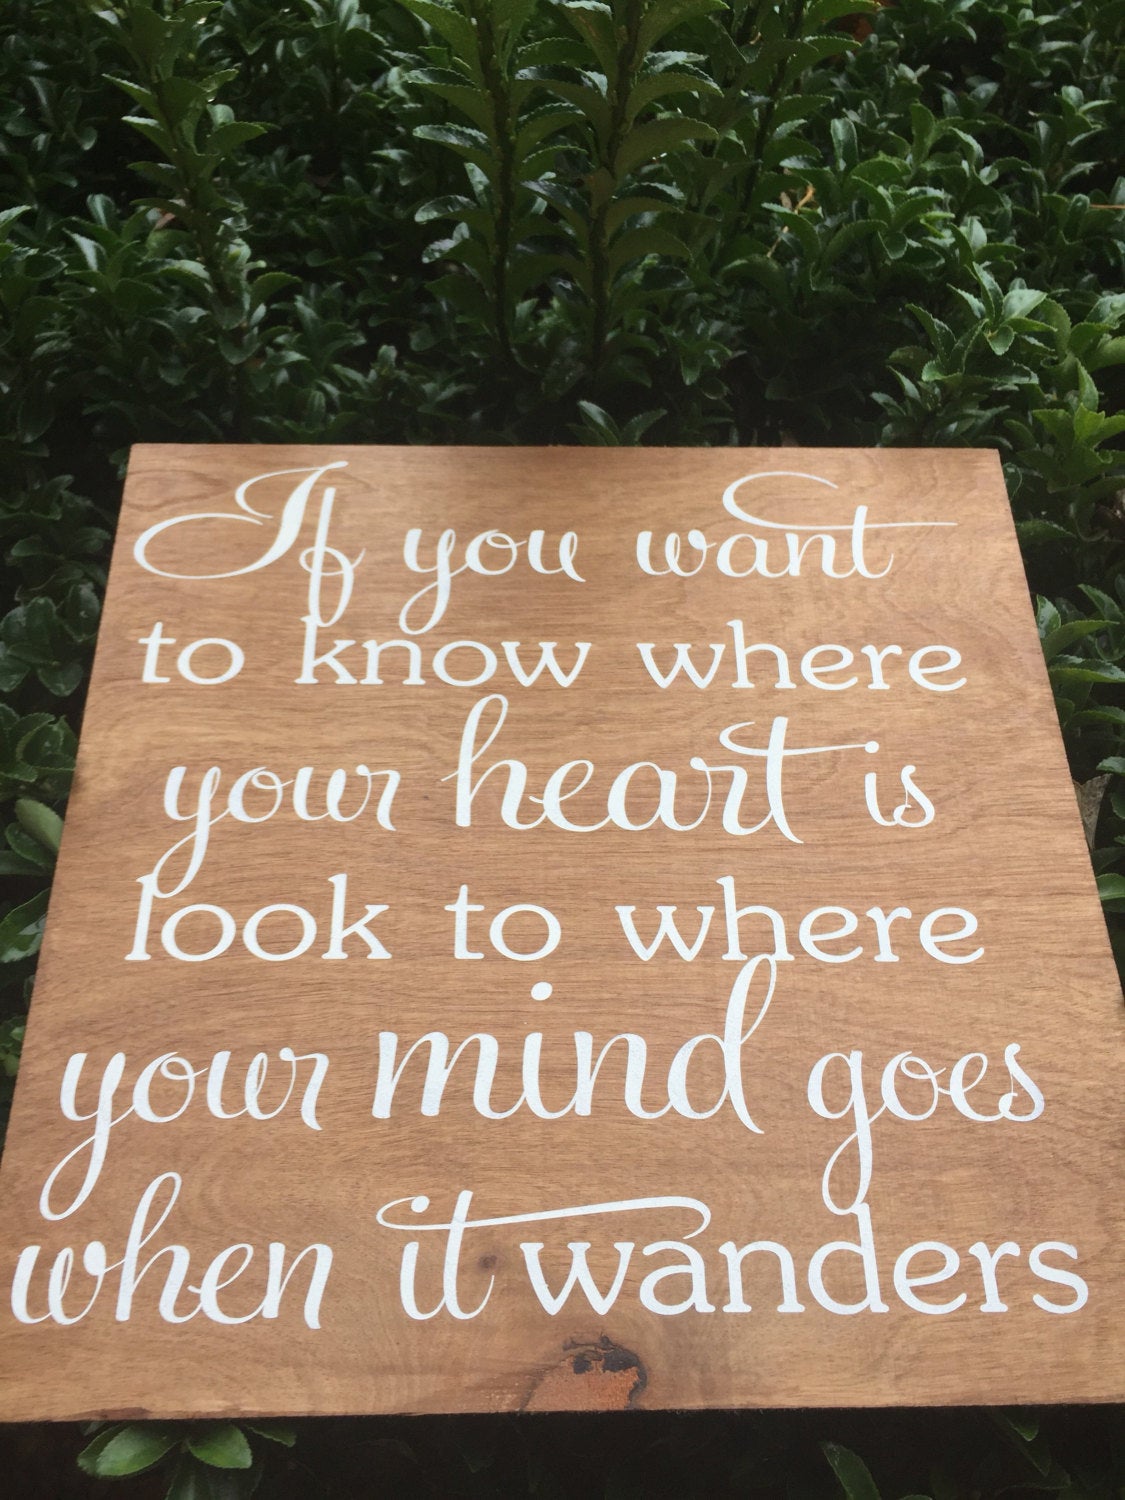 If you want to know where your heart is. Look to where your mind goes when it wanders 12x12 hand painted wood sign.